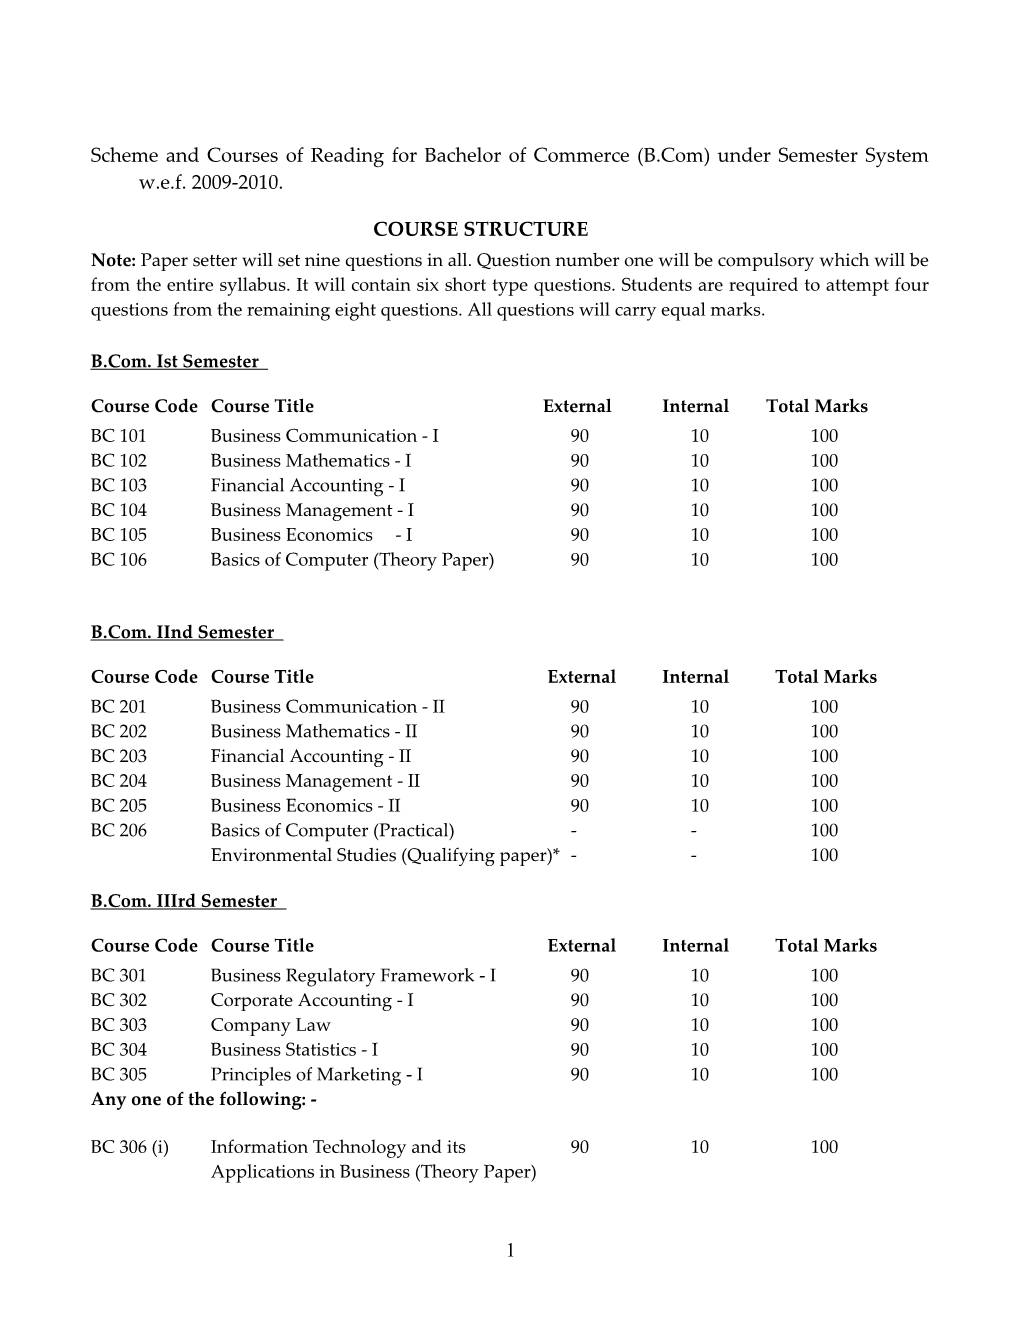 Scheme and Courses of Reading for Bachelor of Commerce (B.Com) Under Semester System W.E.F